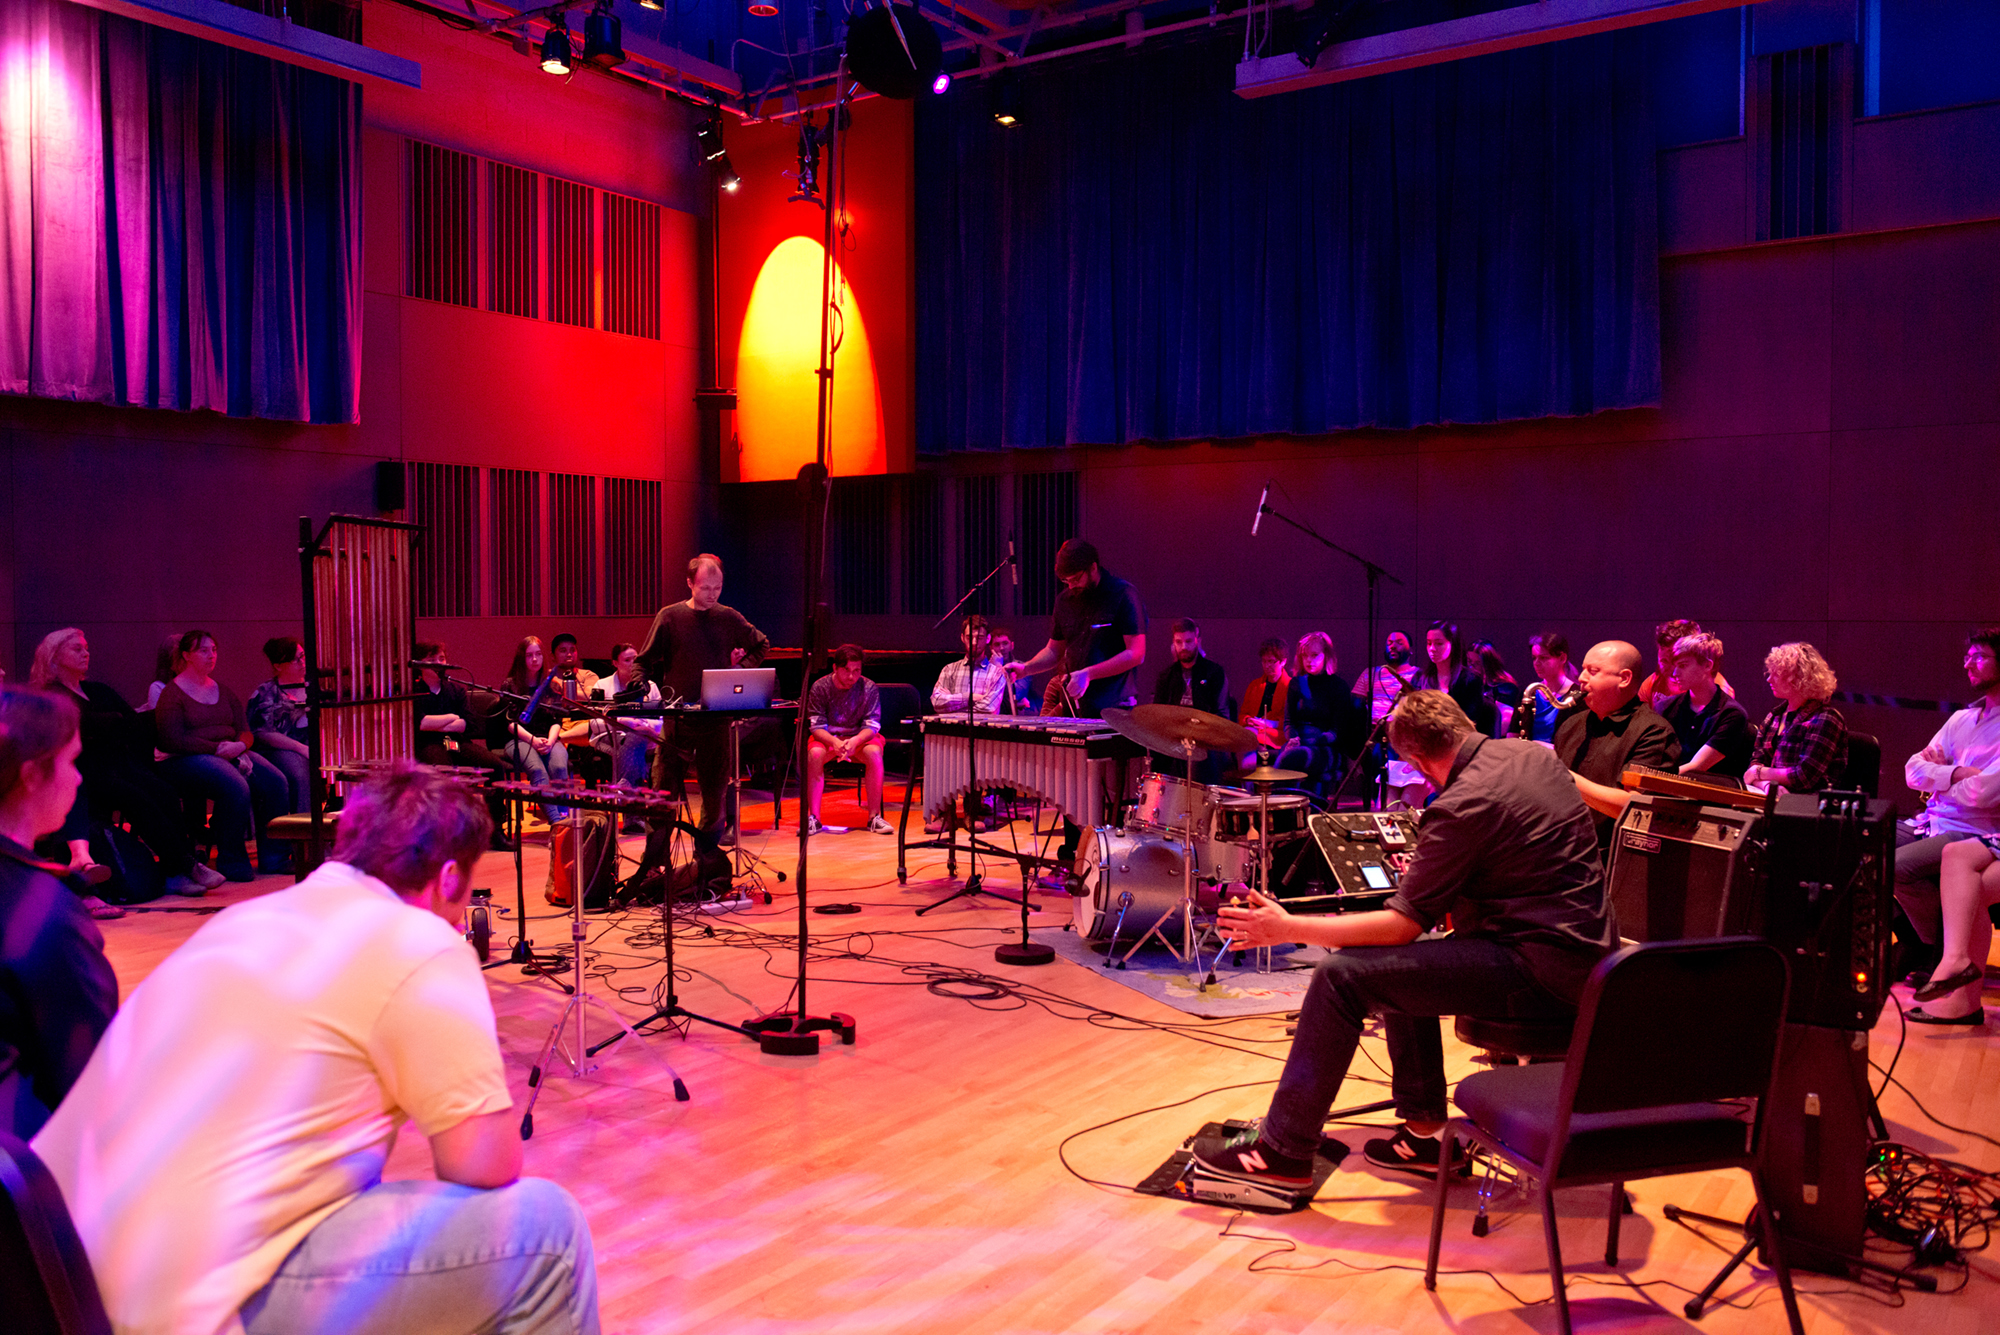 Musicians perform on percussion instruments in a large room bathed with red light